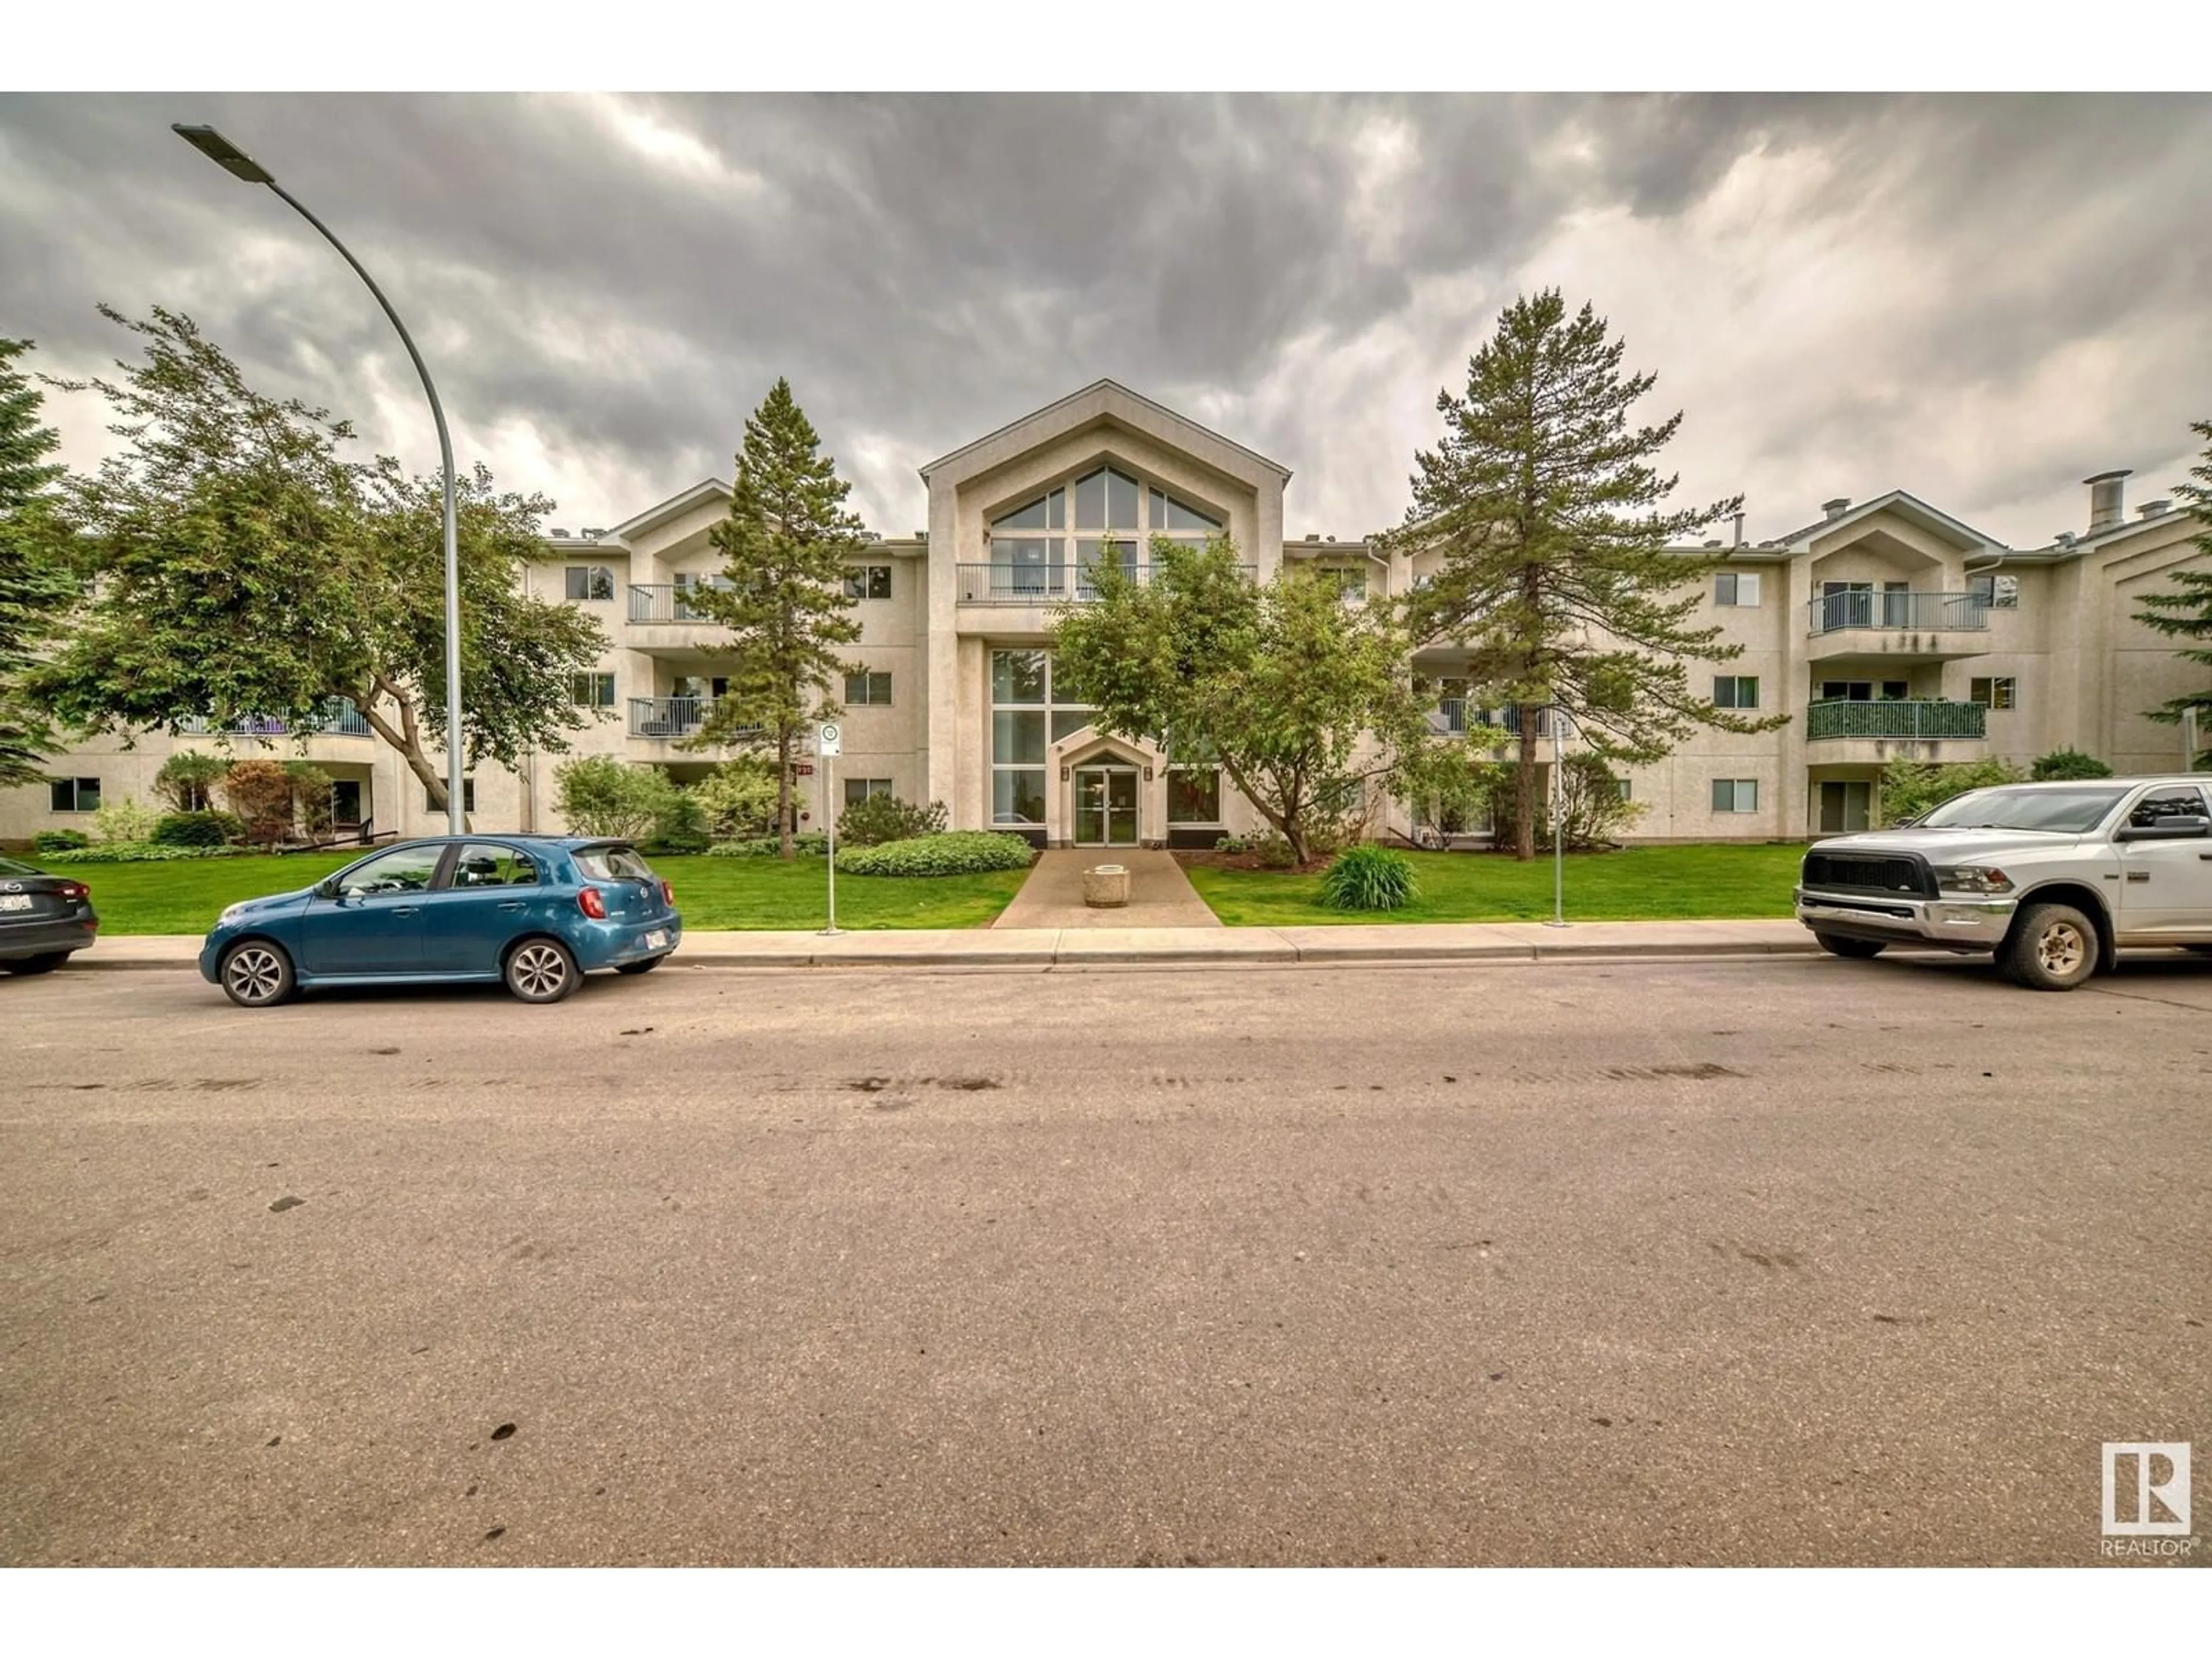 A pic from exterior of the house or condo for #103 11915 106 AV NW, Edmonton Alberta T5H0S2